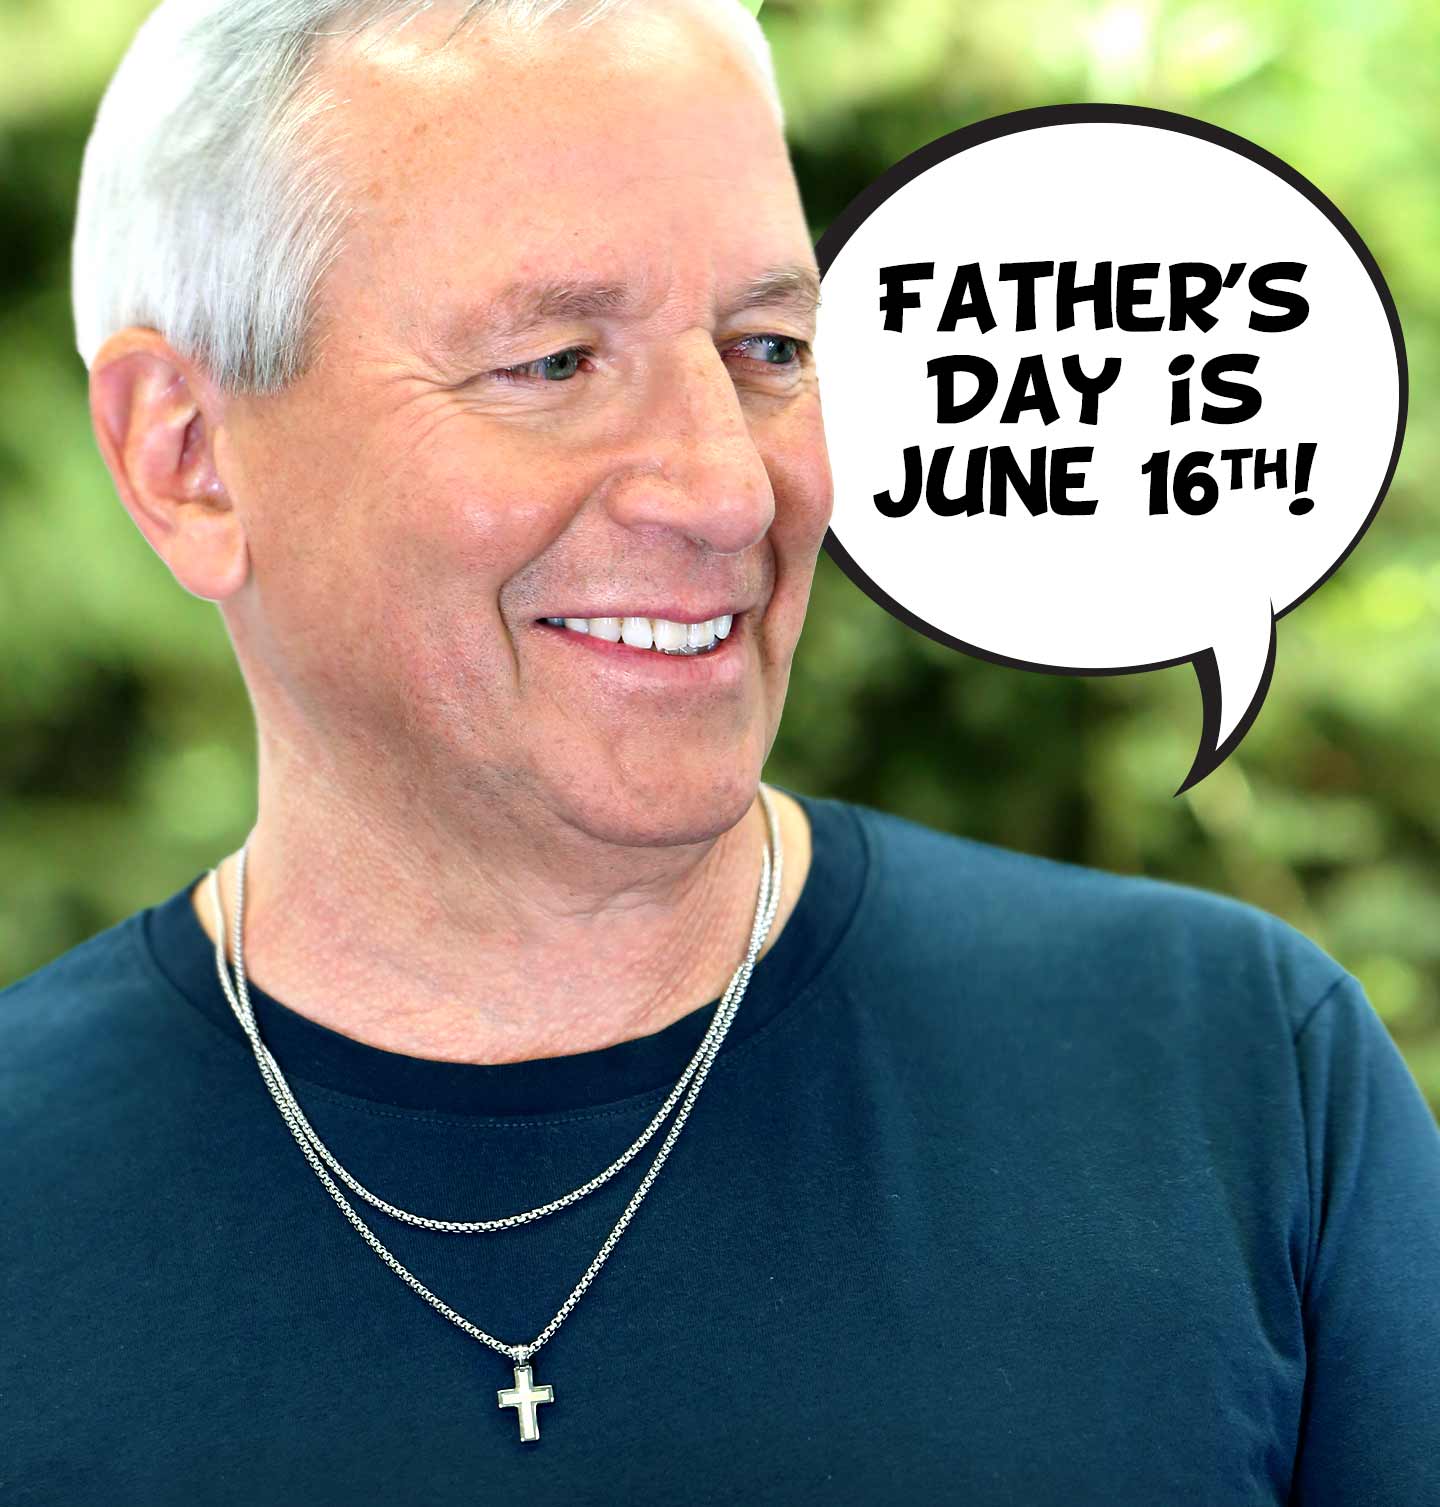 A smiling father wearing a cross and chain necklace.